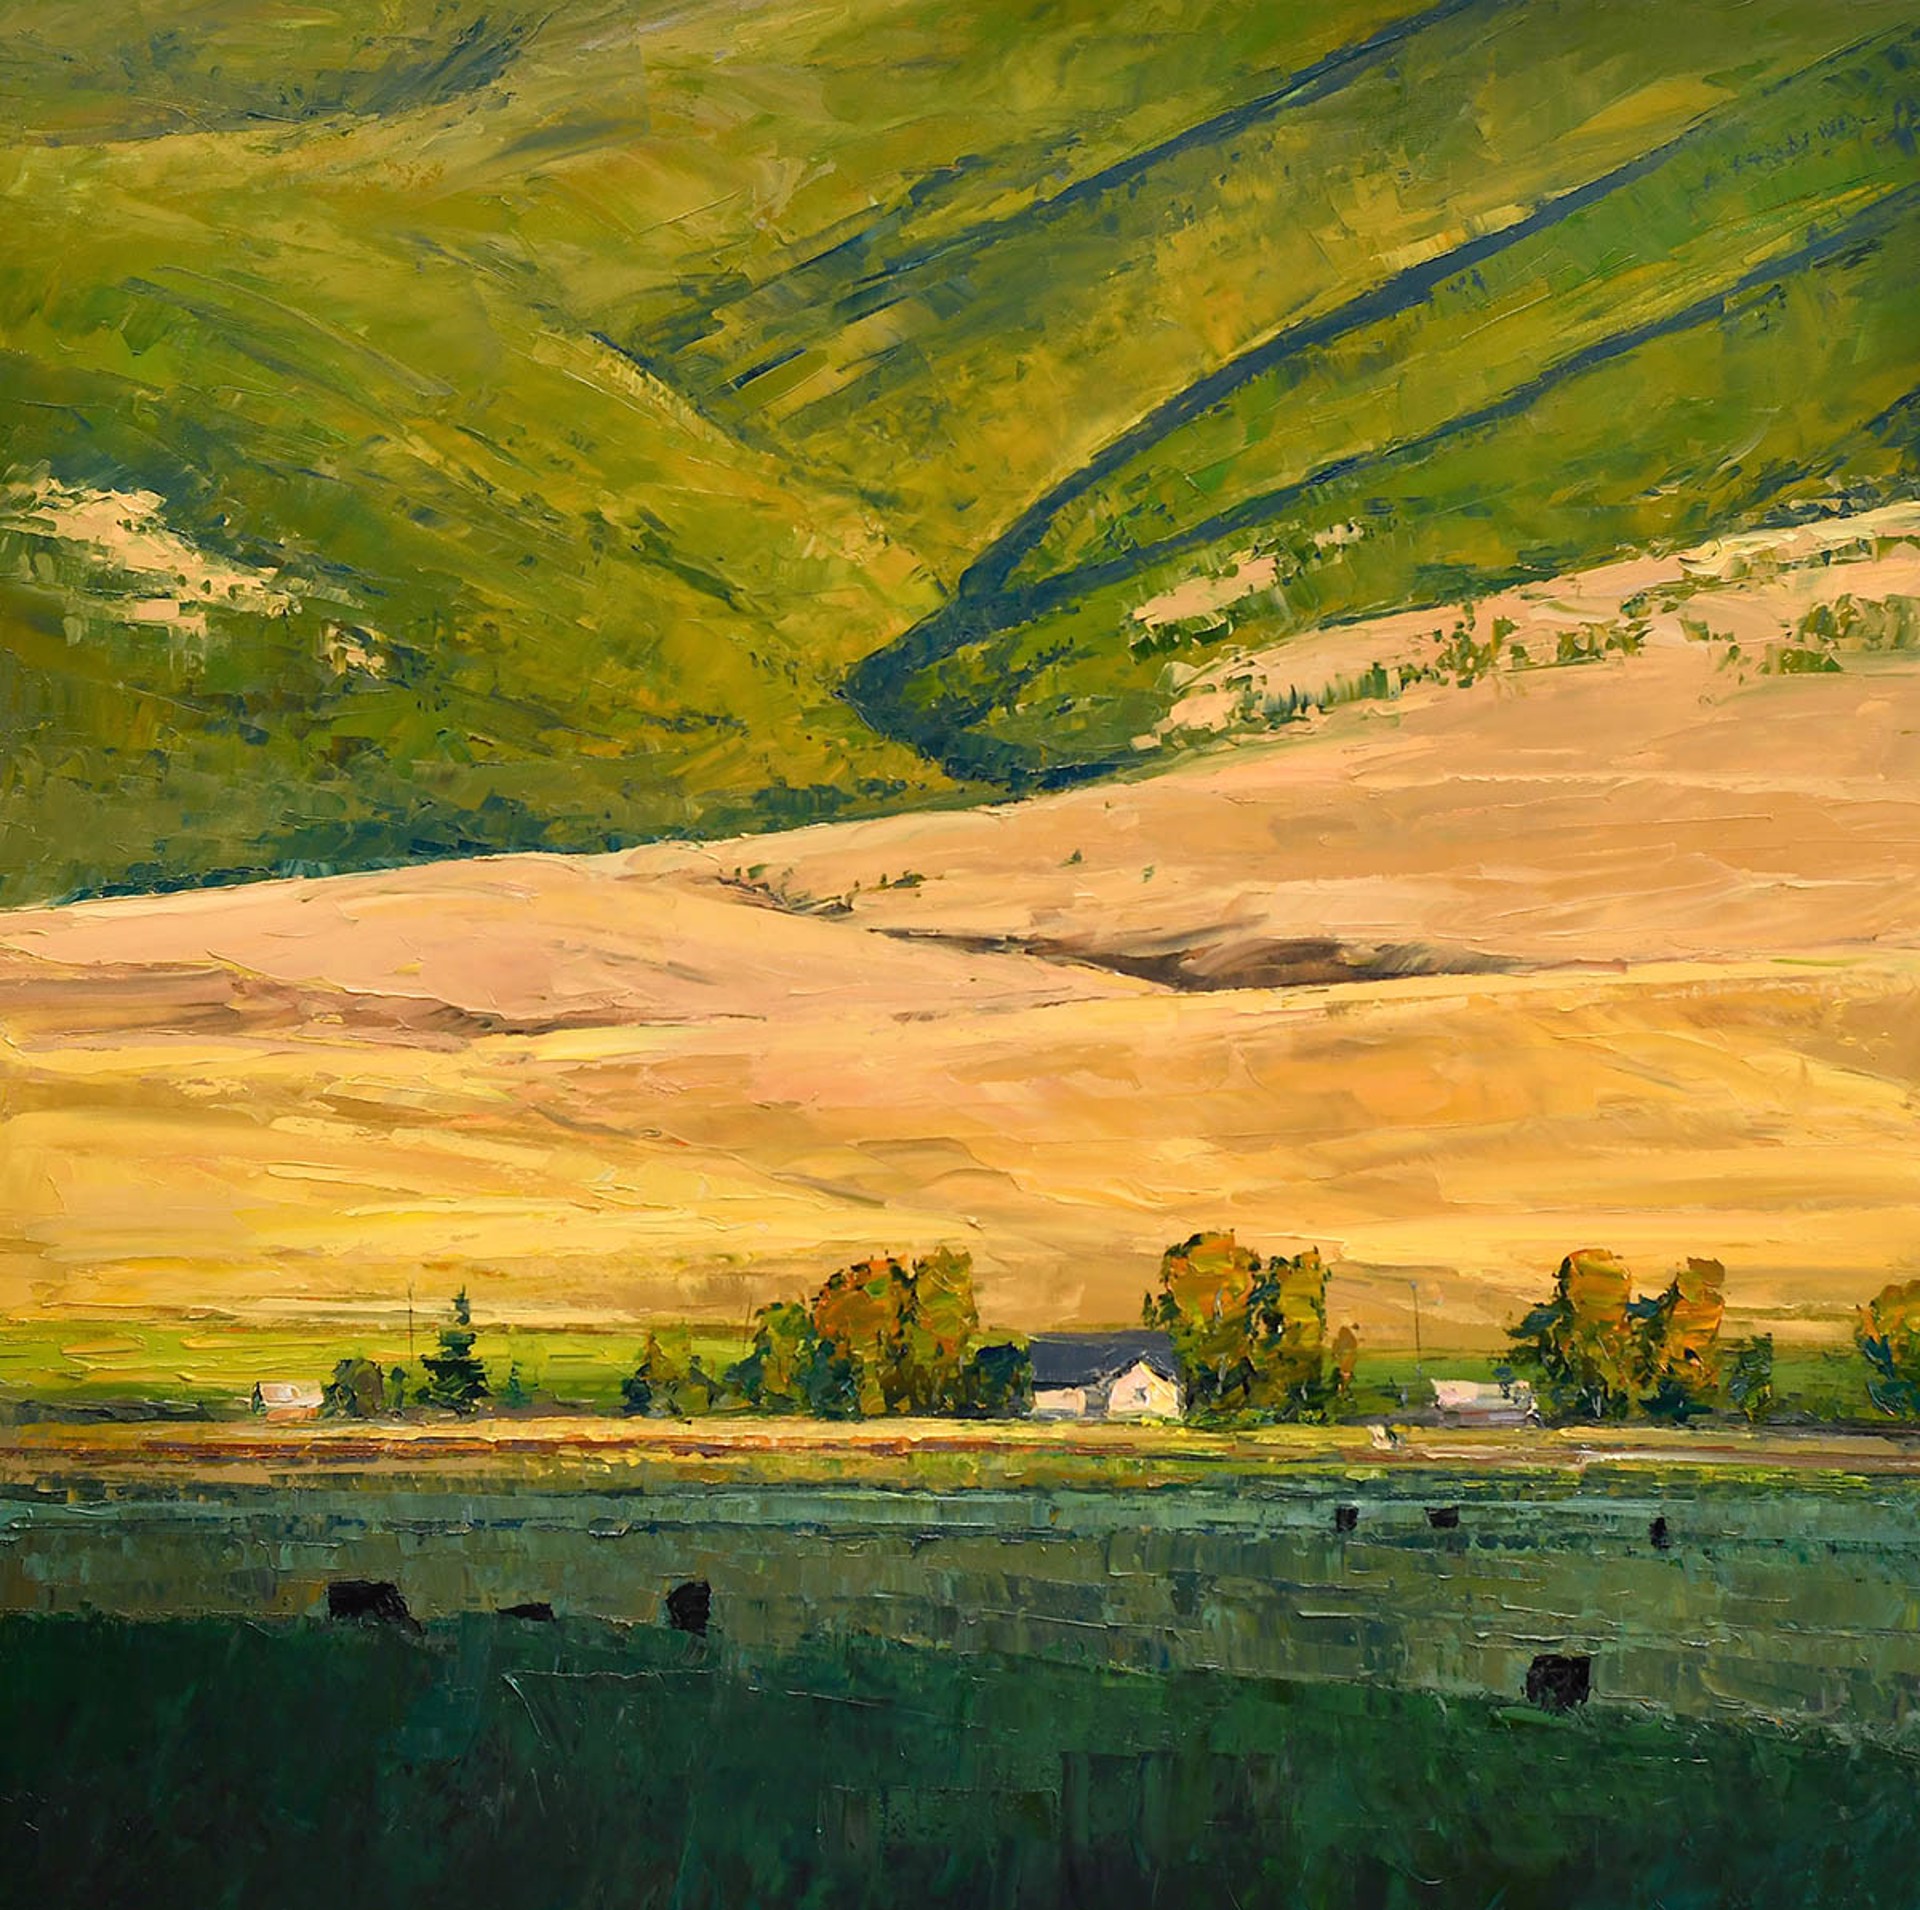 Landscape Oil Painting By Caleb Meyer Using Palette Knife Technique Green Mountains Summer Landscape